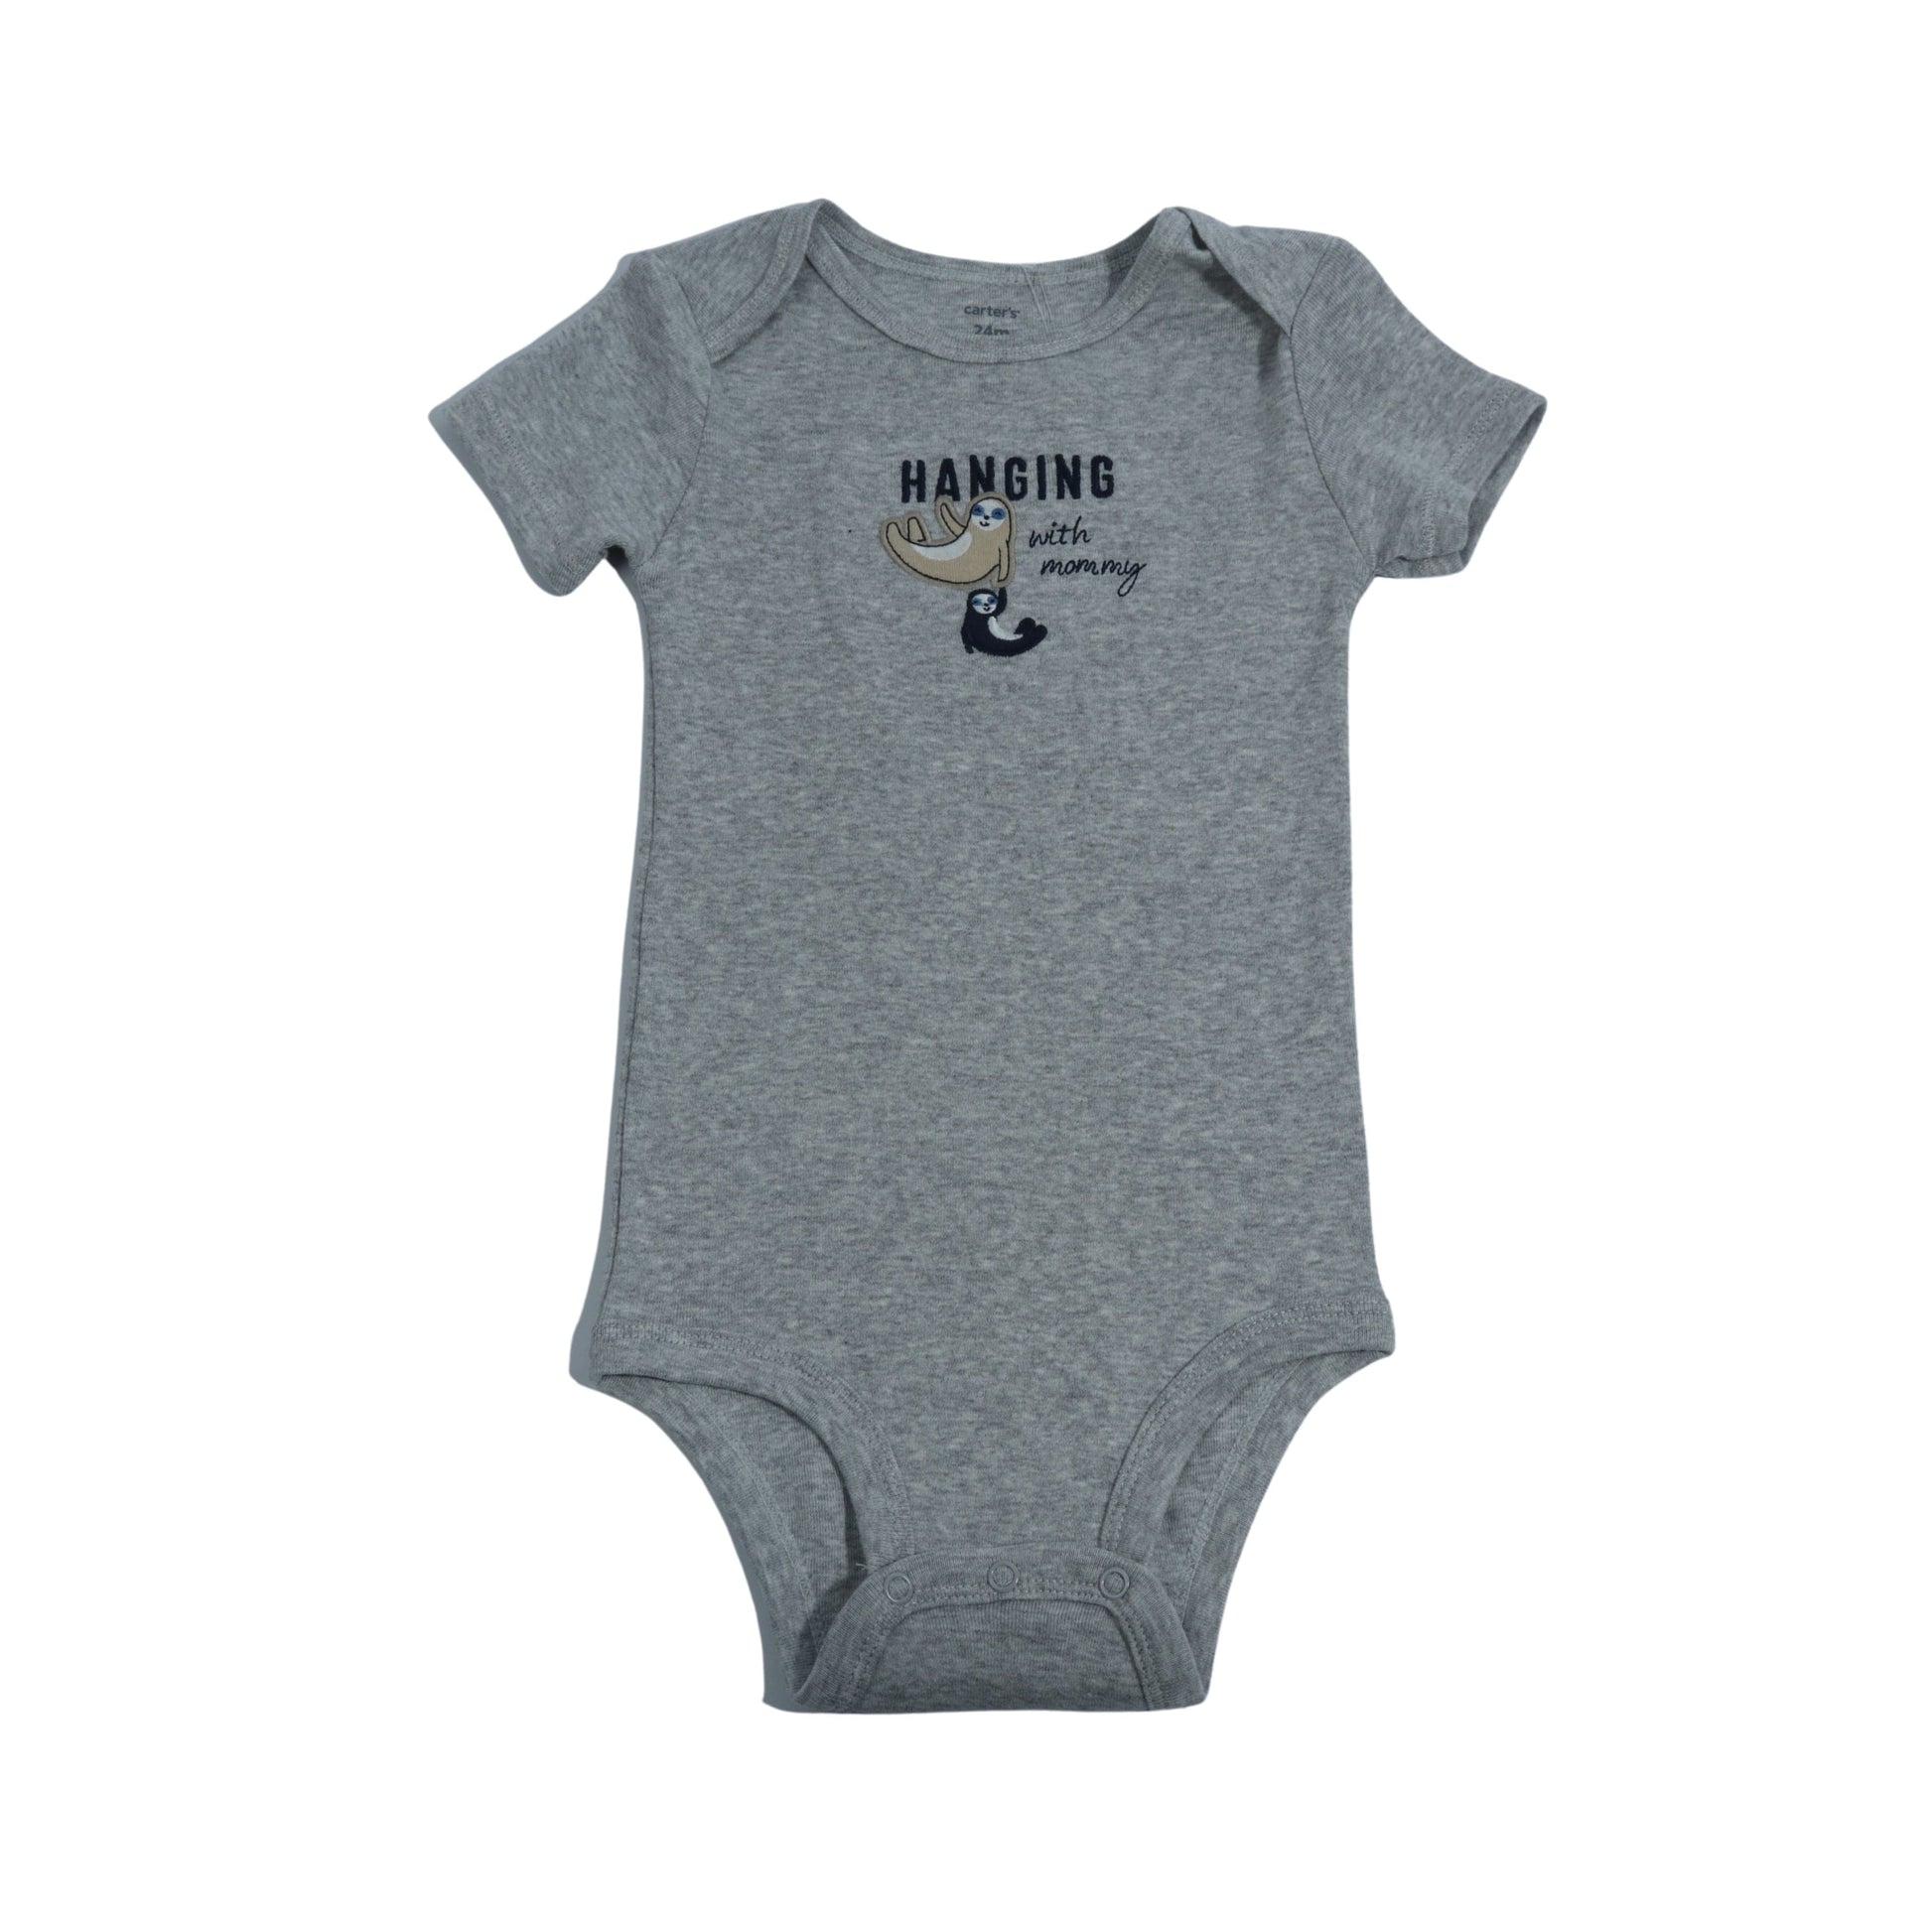 CARTER'S Baby Boy 24 Month / Grey CARTER'S - Baby - Hanging With Mommy Embroidery Bodysuit